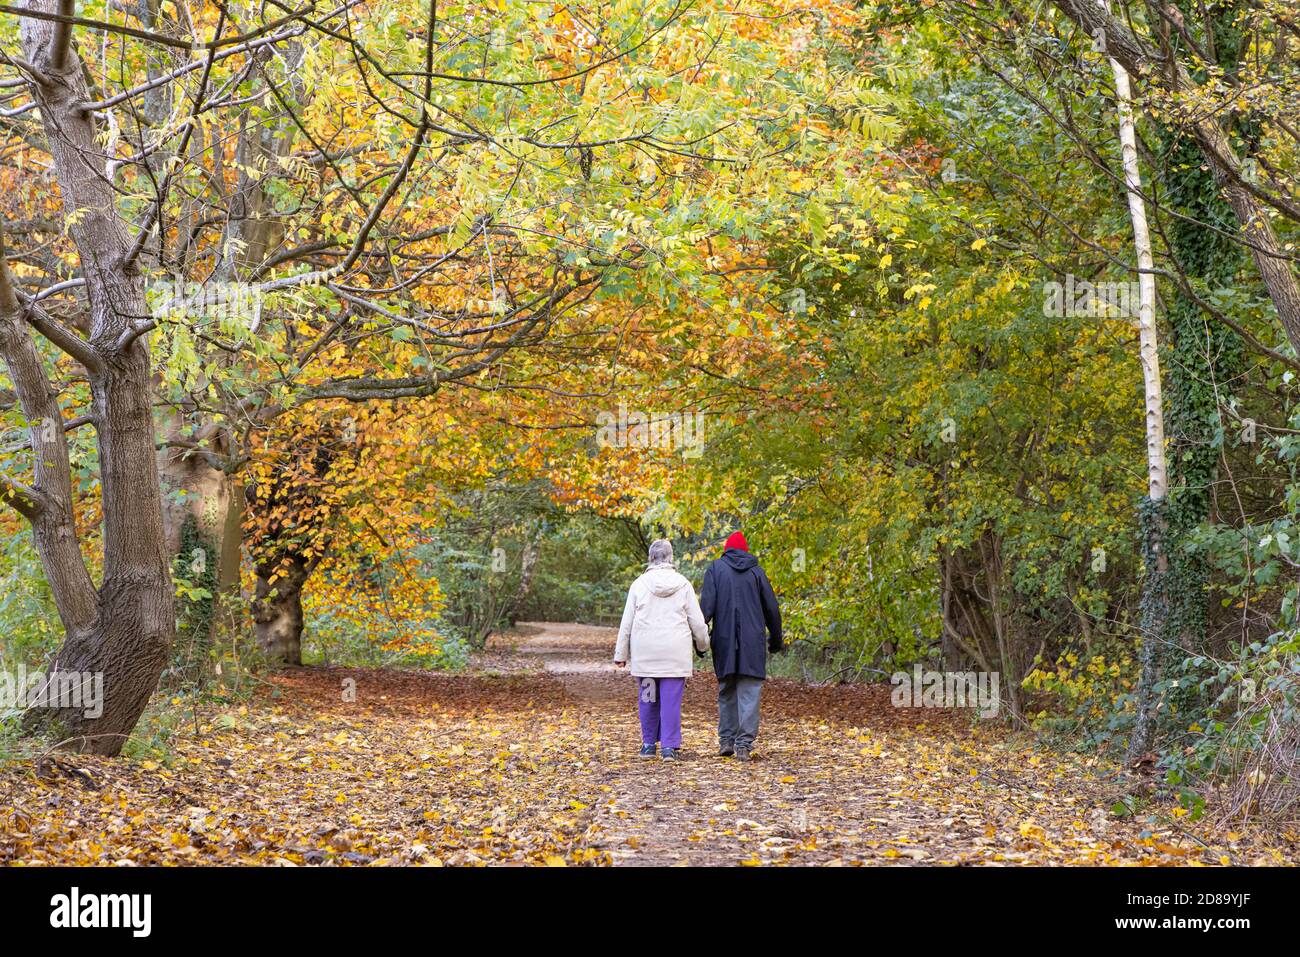 Daventry, Northamptonshire - 28/10/20: An elderly couple, with their backs towards us, walk down a leaf-strewn path beneath trees with autumn foliage. Stock Photo